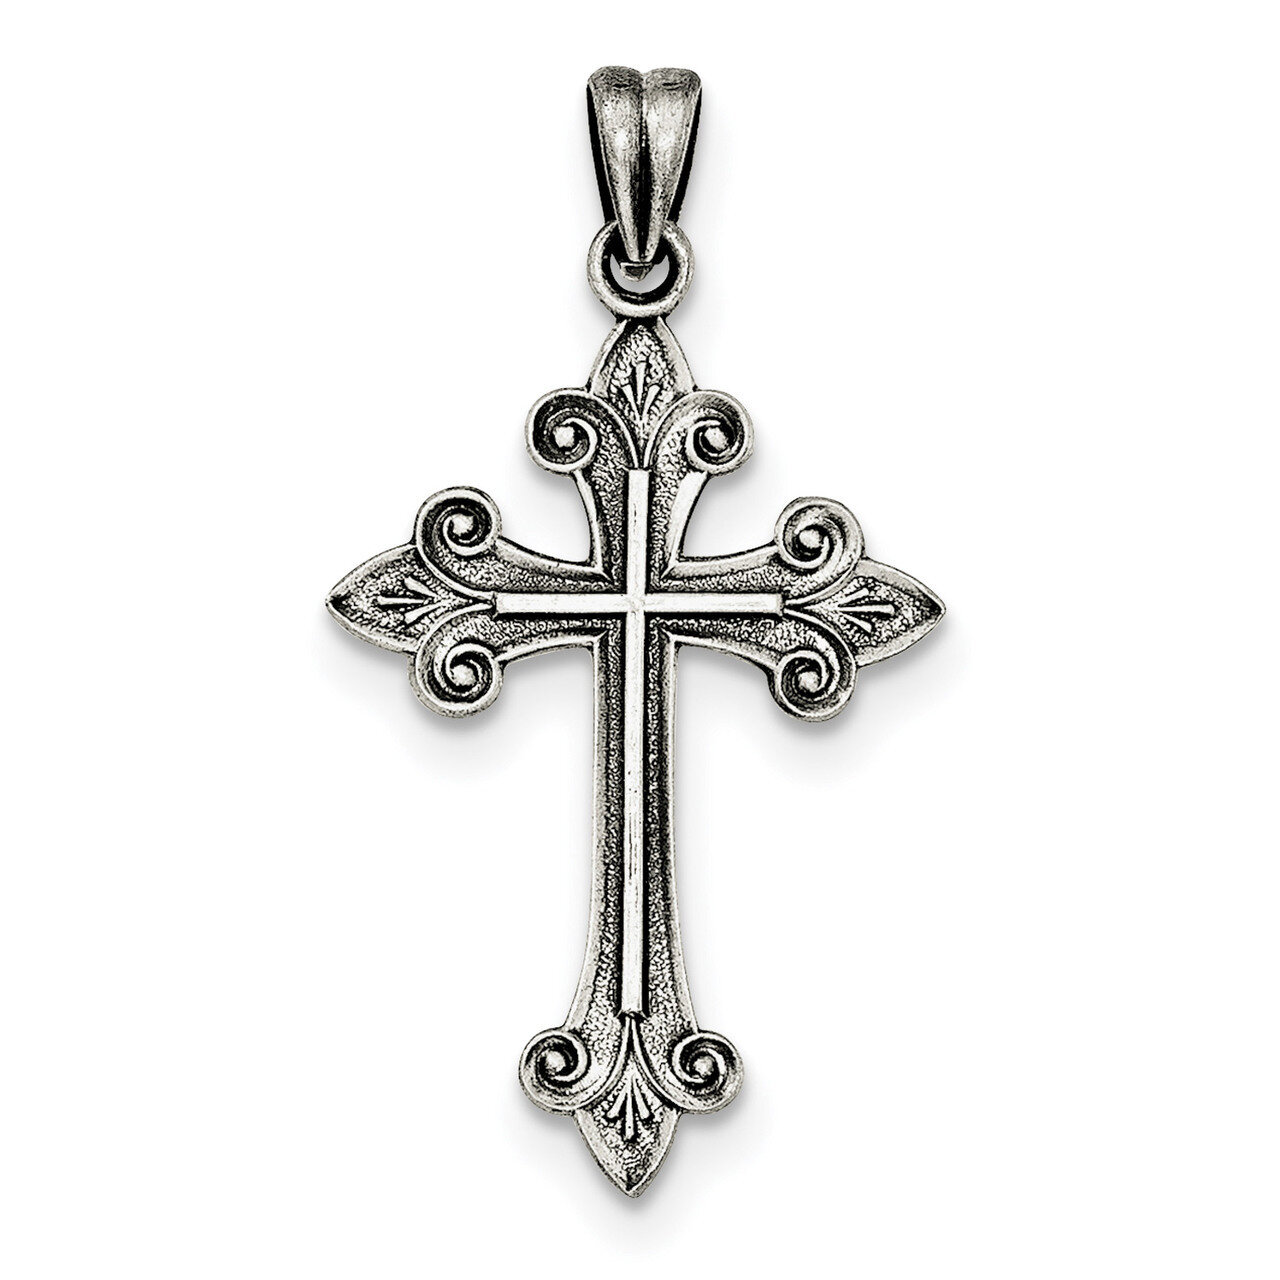 Textured and Brushed Latin Cross Pendant Sterling Silver Antiqued QC8153